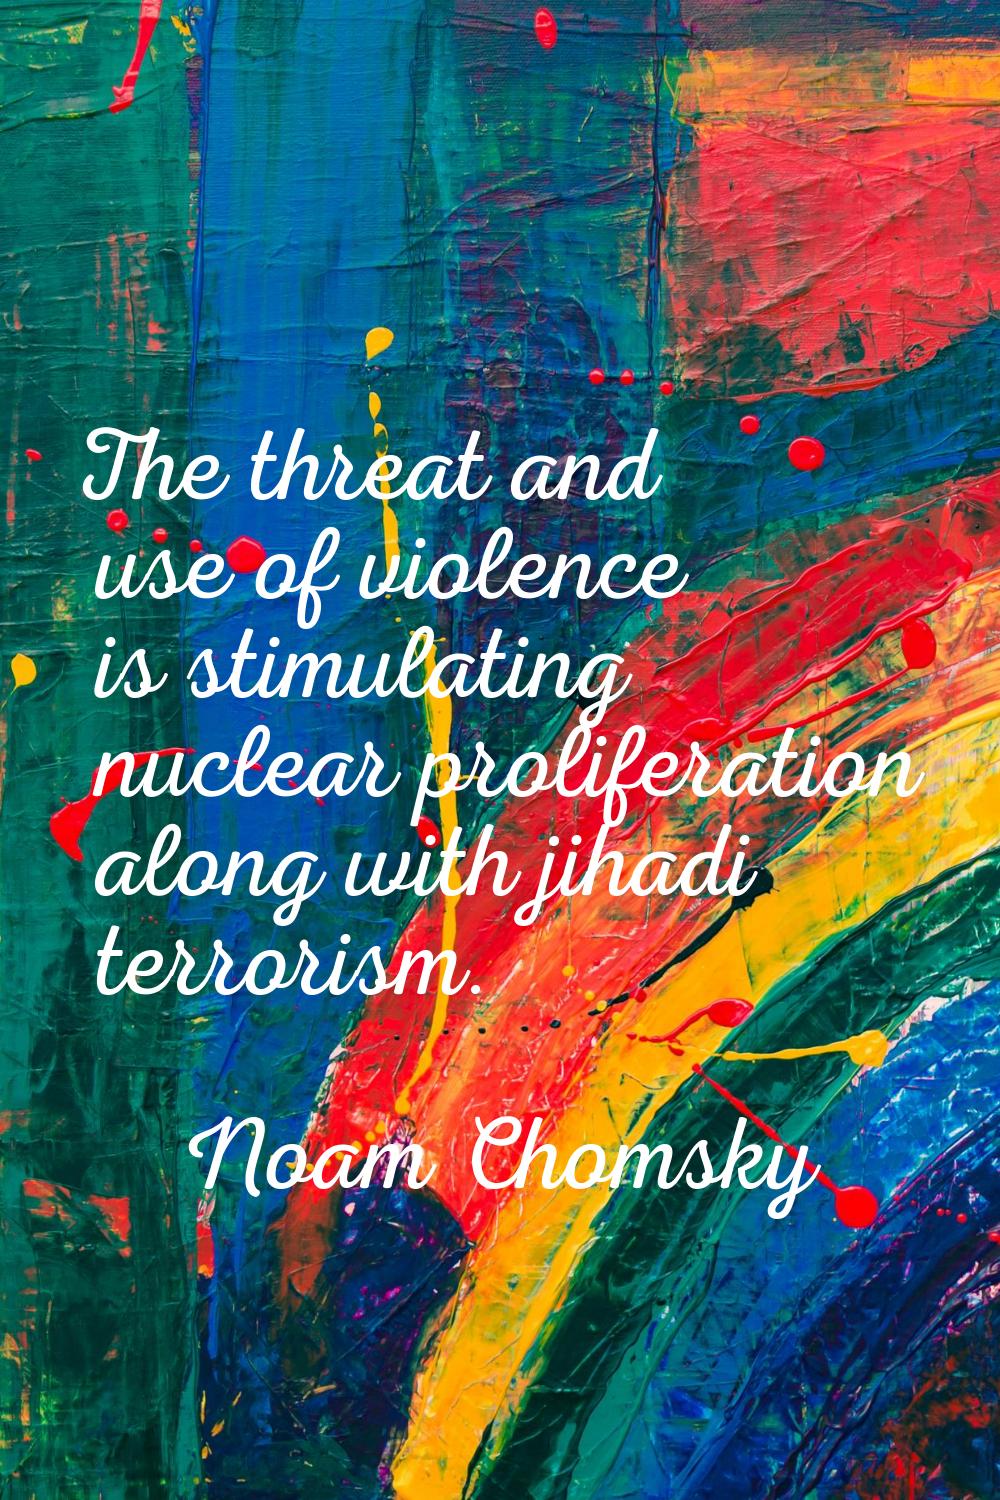 The threat and use of violence is stimulating nuclear proliferation along with jihadi terrorism.